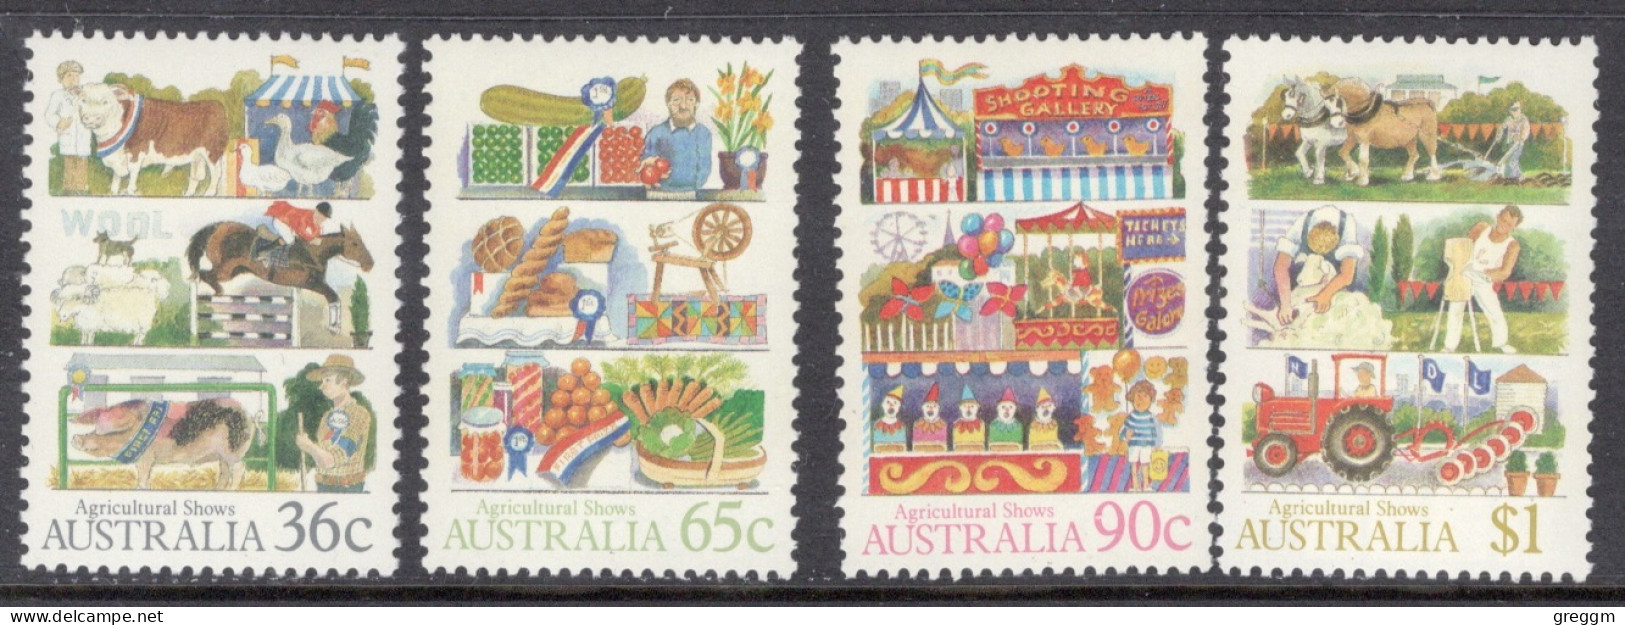 Australia 1987 Set Of Stamps - Agricultural Shows In Unmounted Mint - Mint Stamps